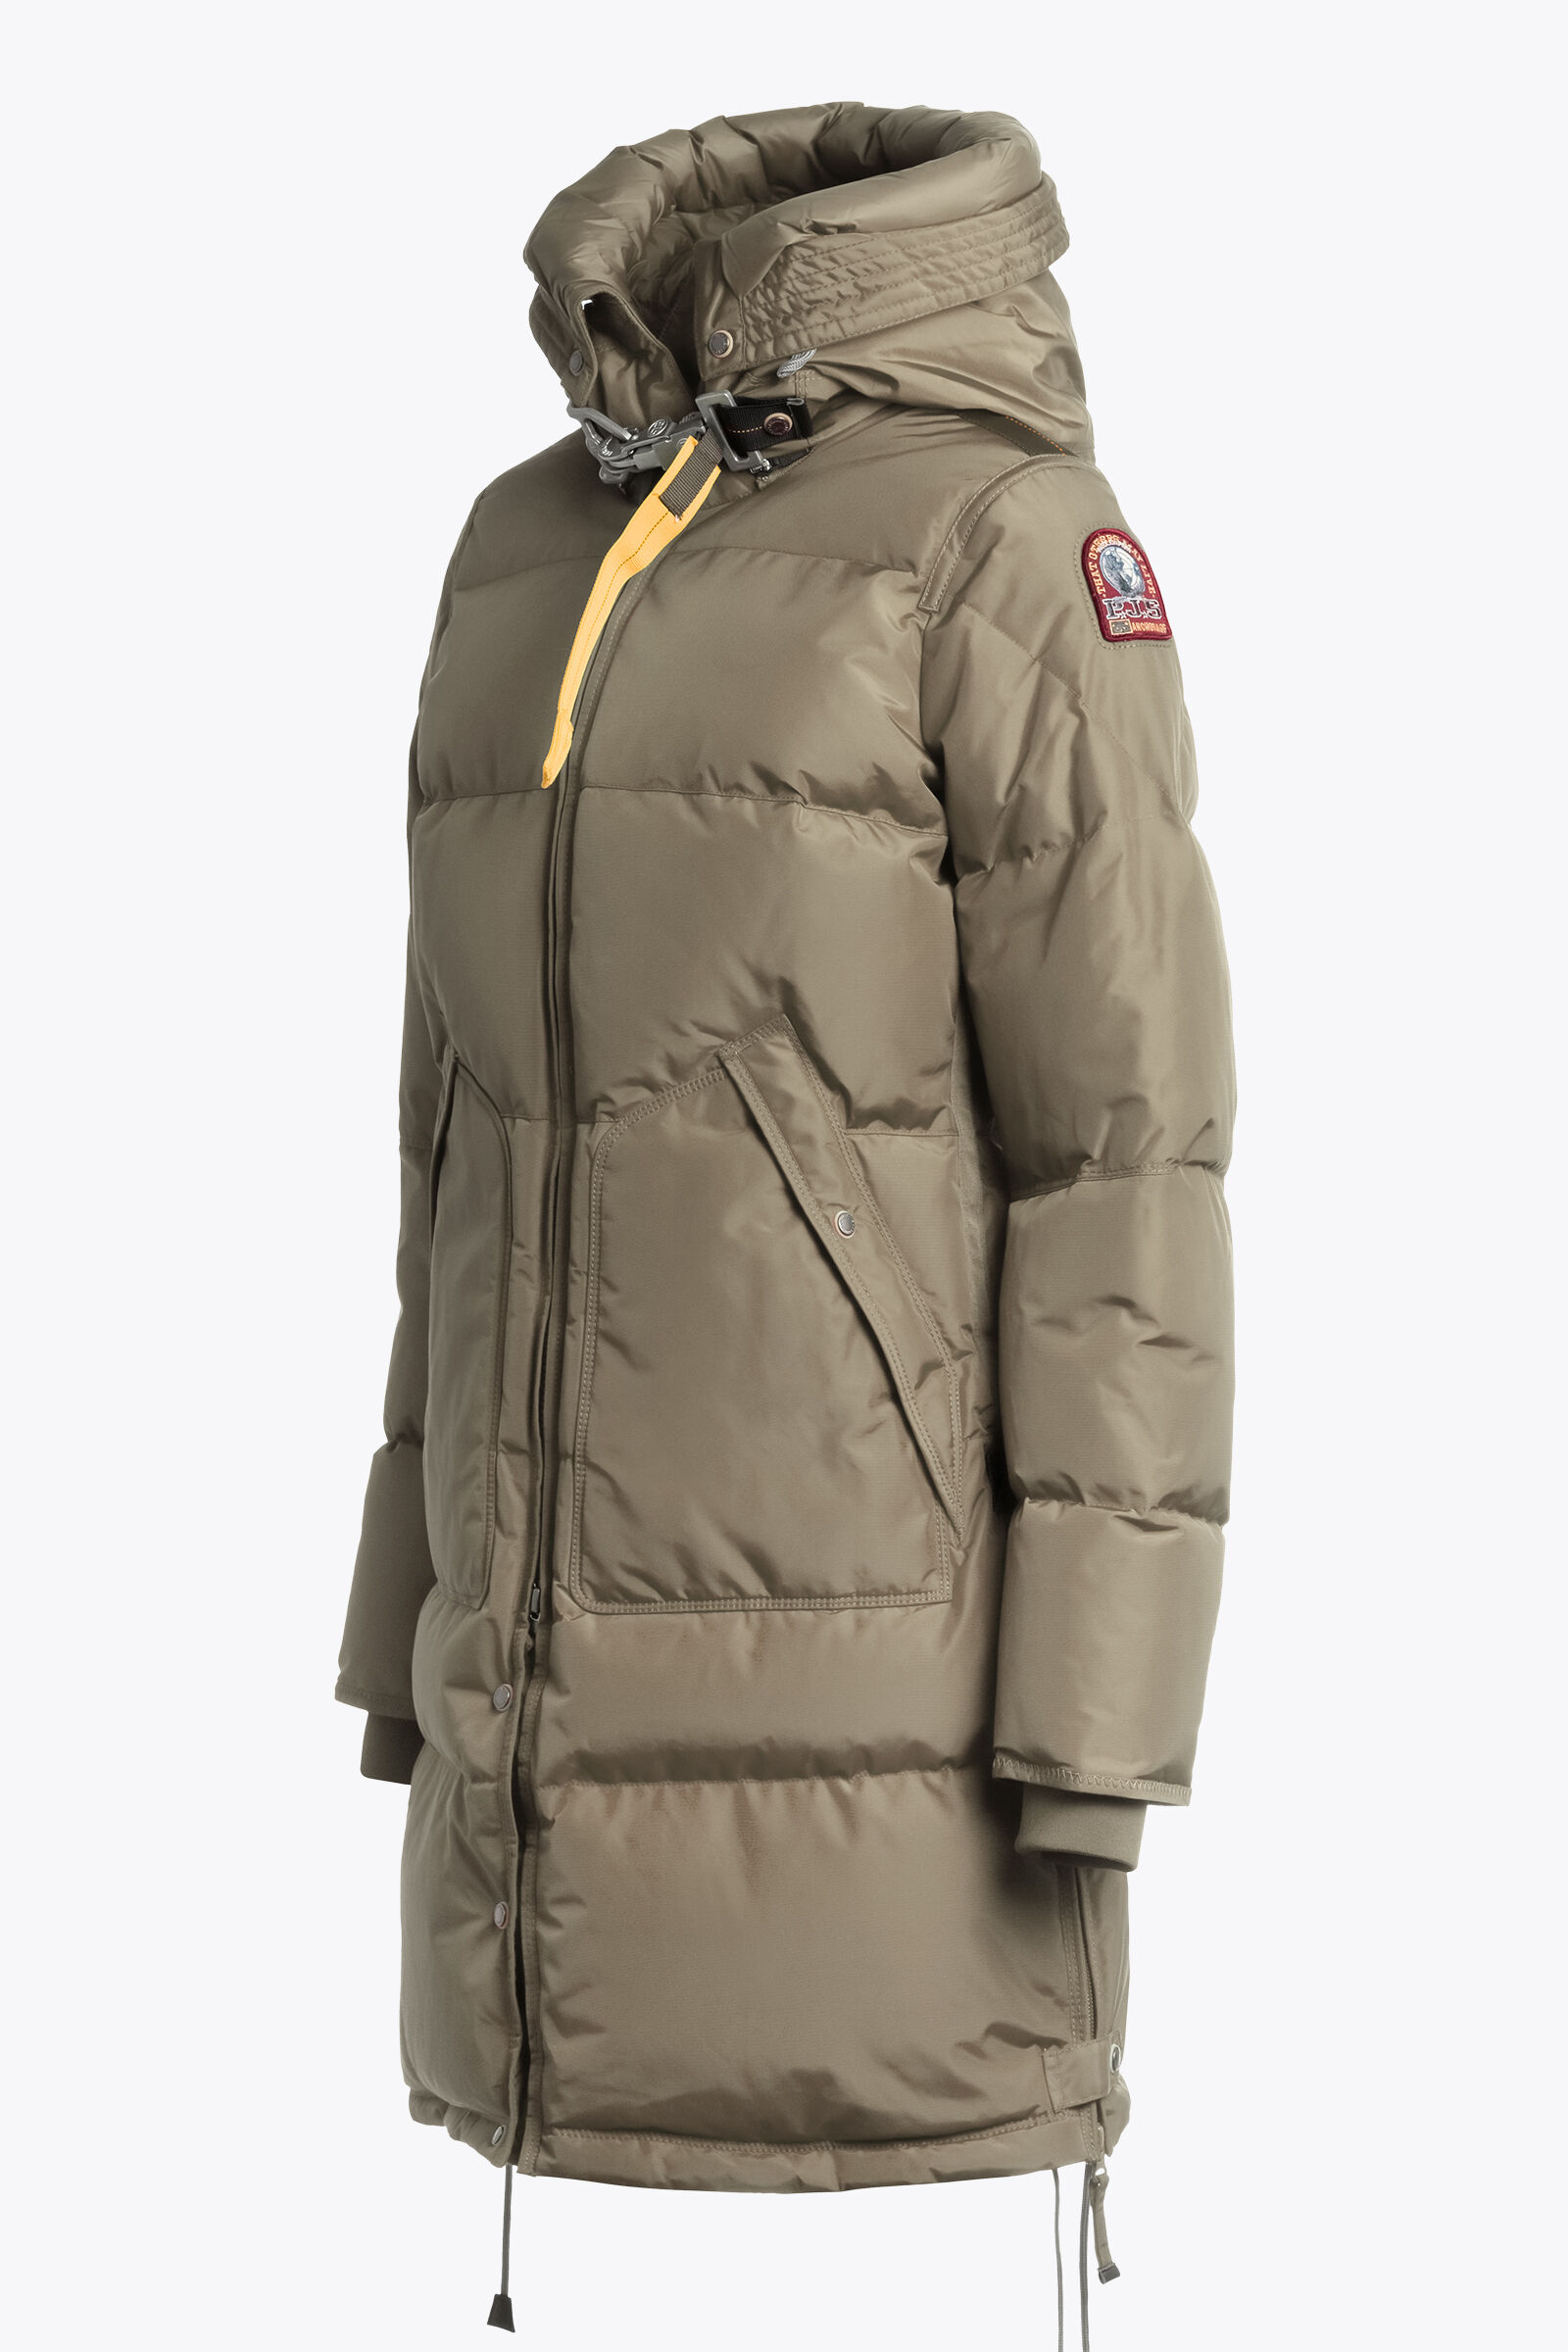 LONG BEAR Long Jackets in ATMOSPHERE | Parajumpers®